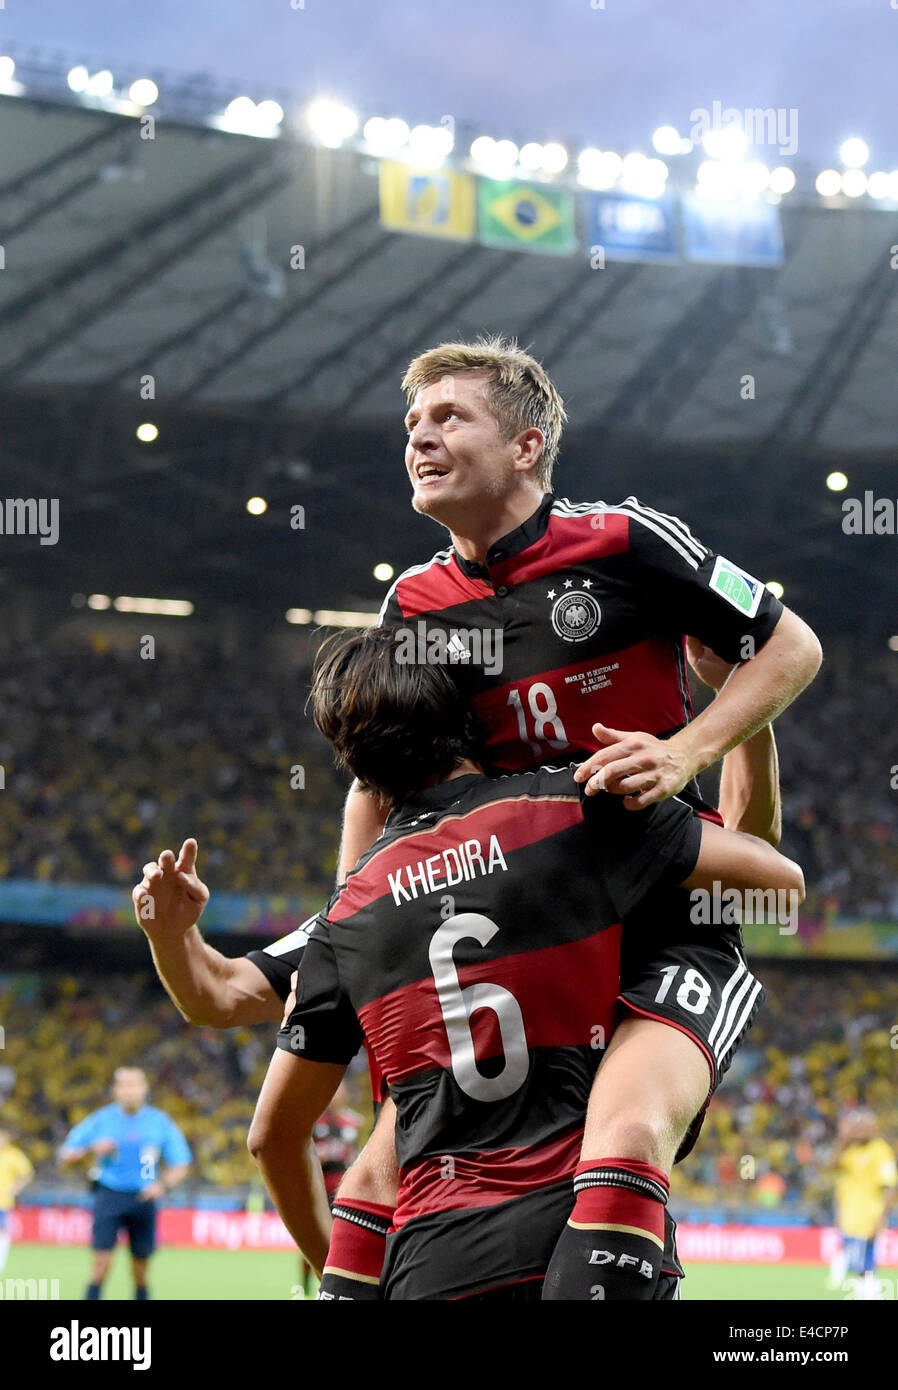 Belo Horizonte, Brazil. 08th July, 2014. Toni Kroos (top) of Germany celebrates with his teammate Miroslav Klose (L) and Sami Khedira after the scoring a goal during the FIFA World Cup 2014 semi-final soccer match between Brazil and Germany at Estadio Mineirao in Belo Horizonte, Brazil, 08 July 2014. Photo: Marcus Brandt/dpa/Alamy Live News Stock Photo